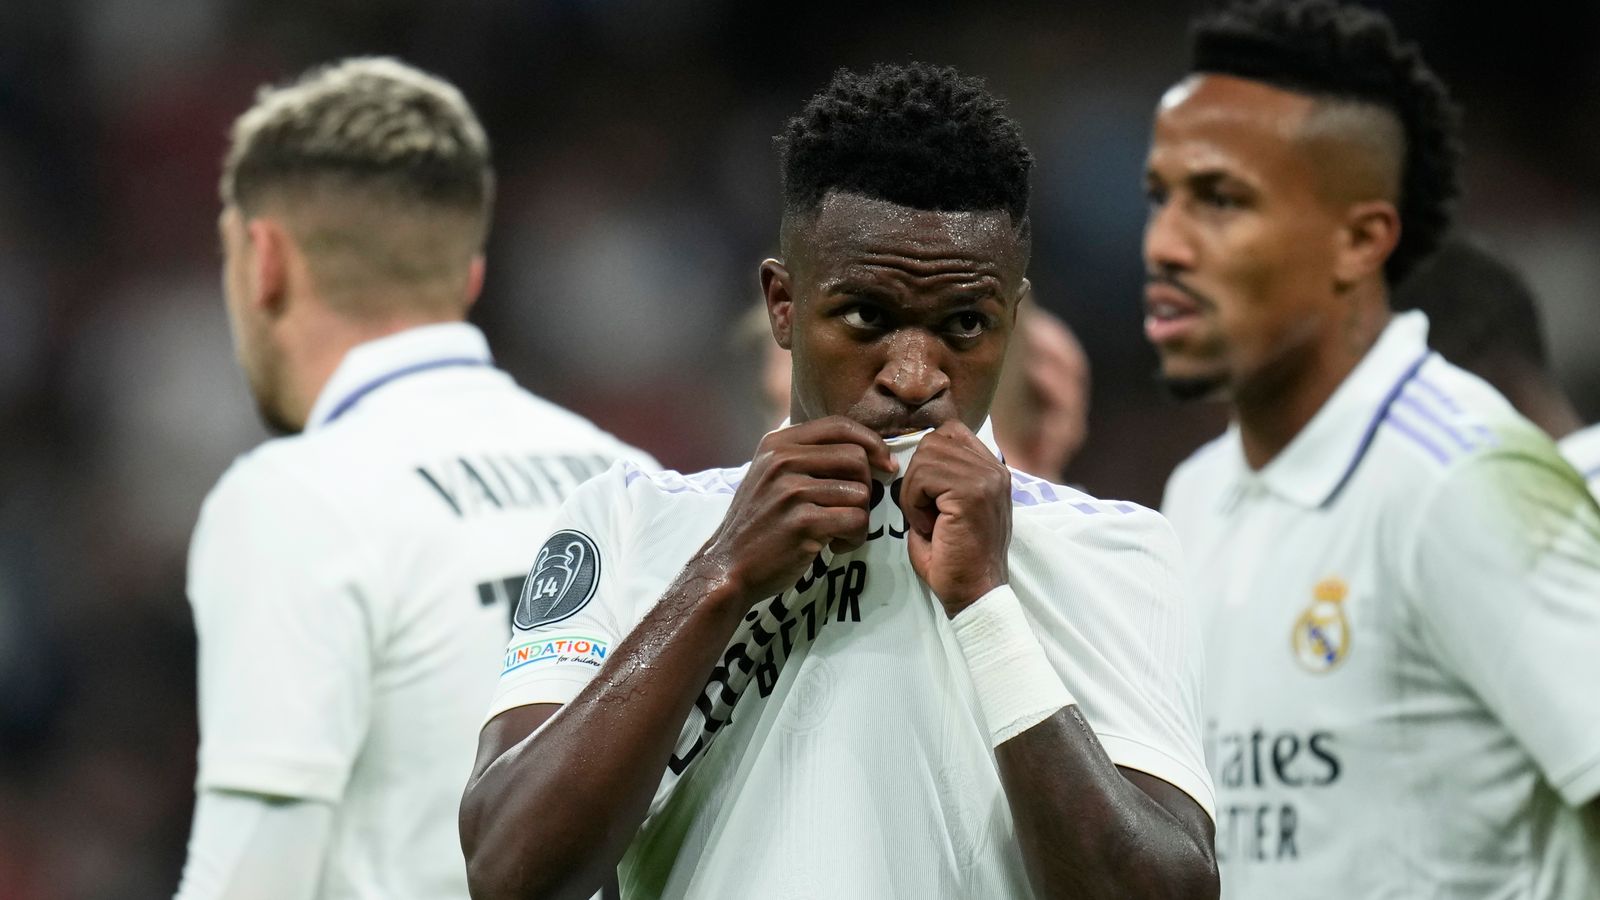 Vinicius Jr: La Liga file charges over racial abuse of Real Madrid forward following win over Real Valladolid